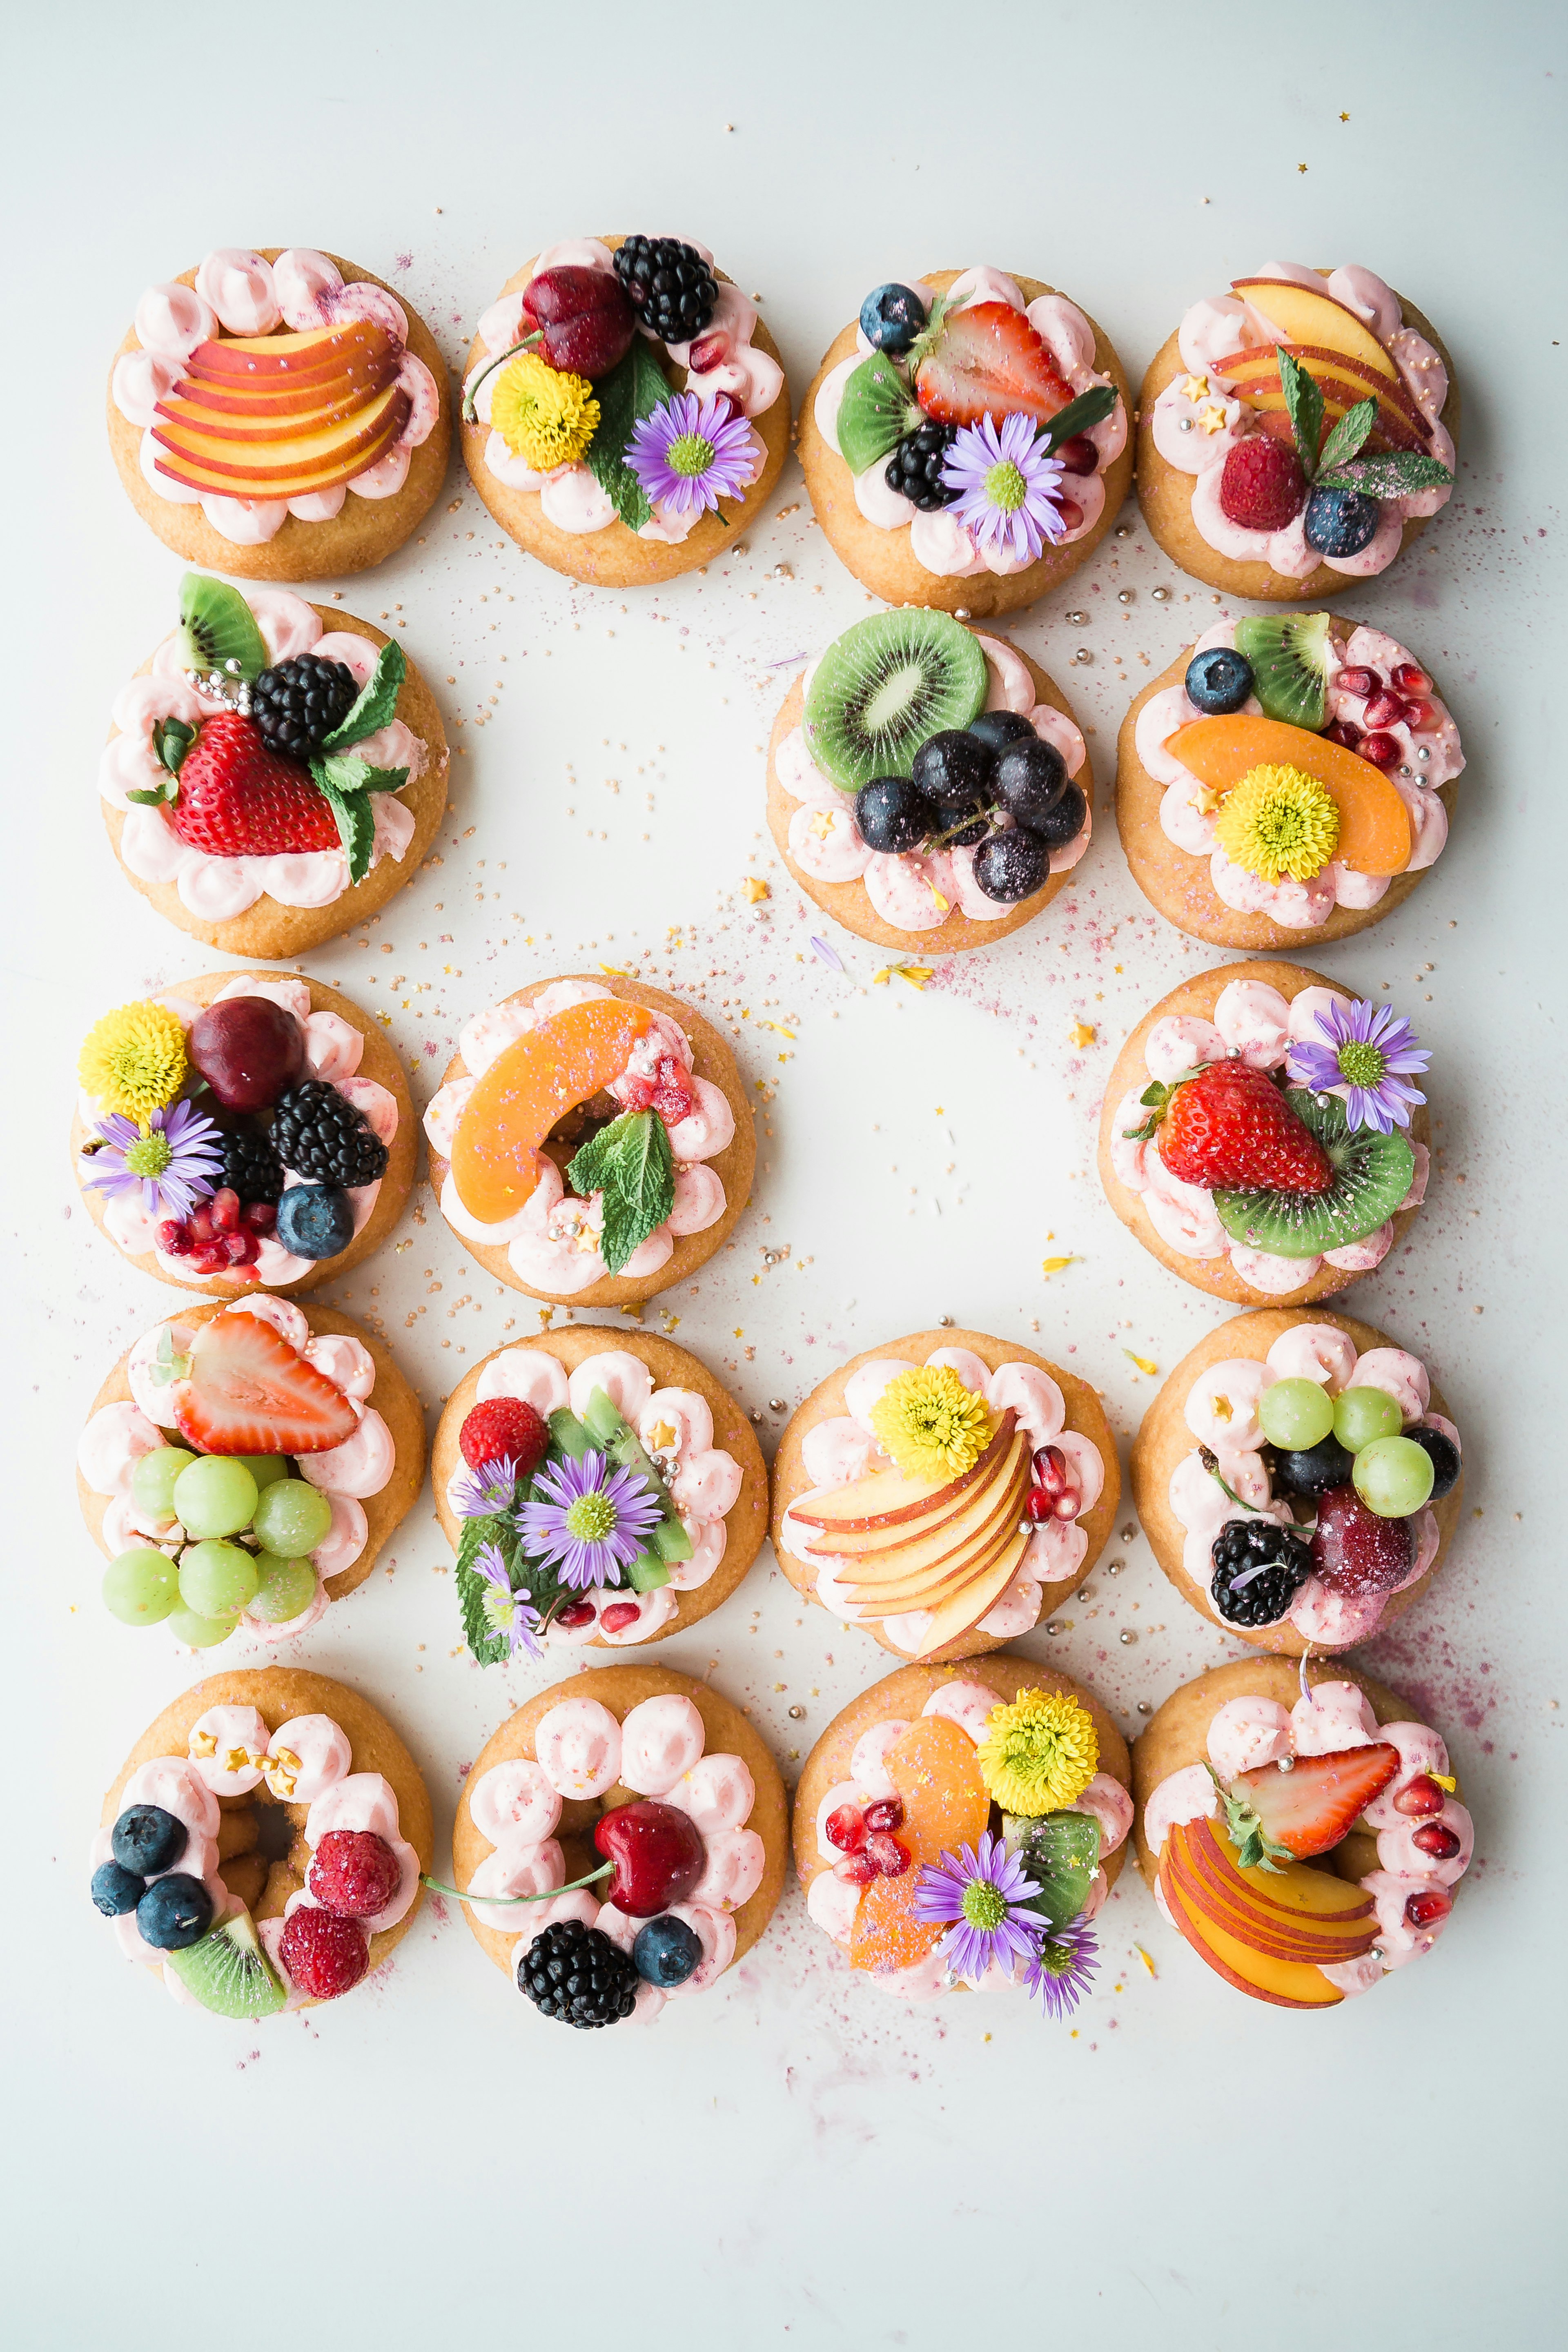 Donuts halo’ed with fruits and flowers. Whatever could be better?